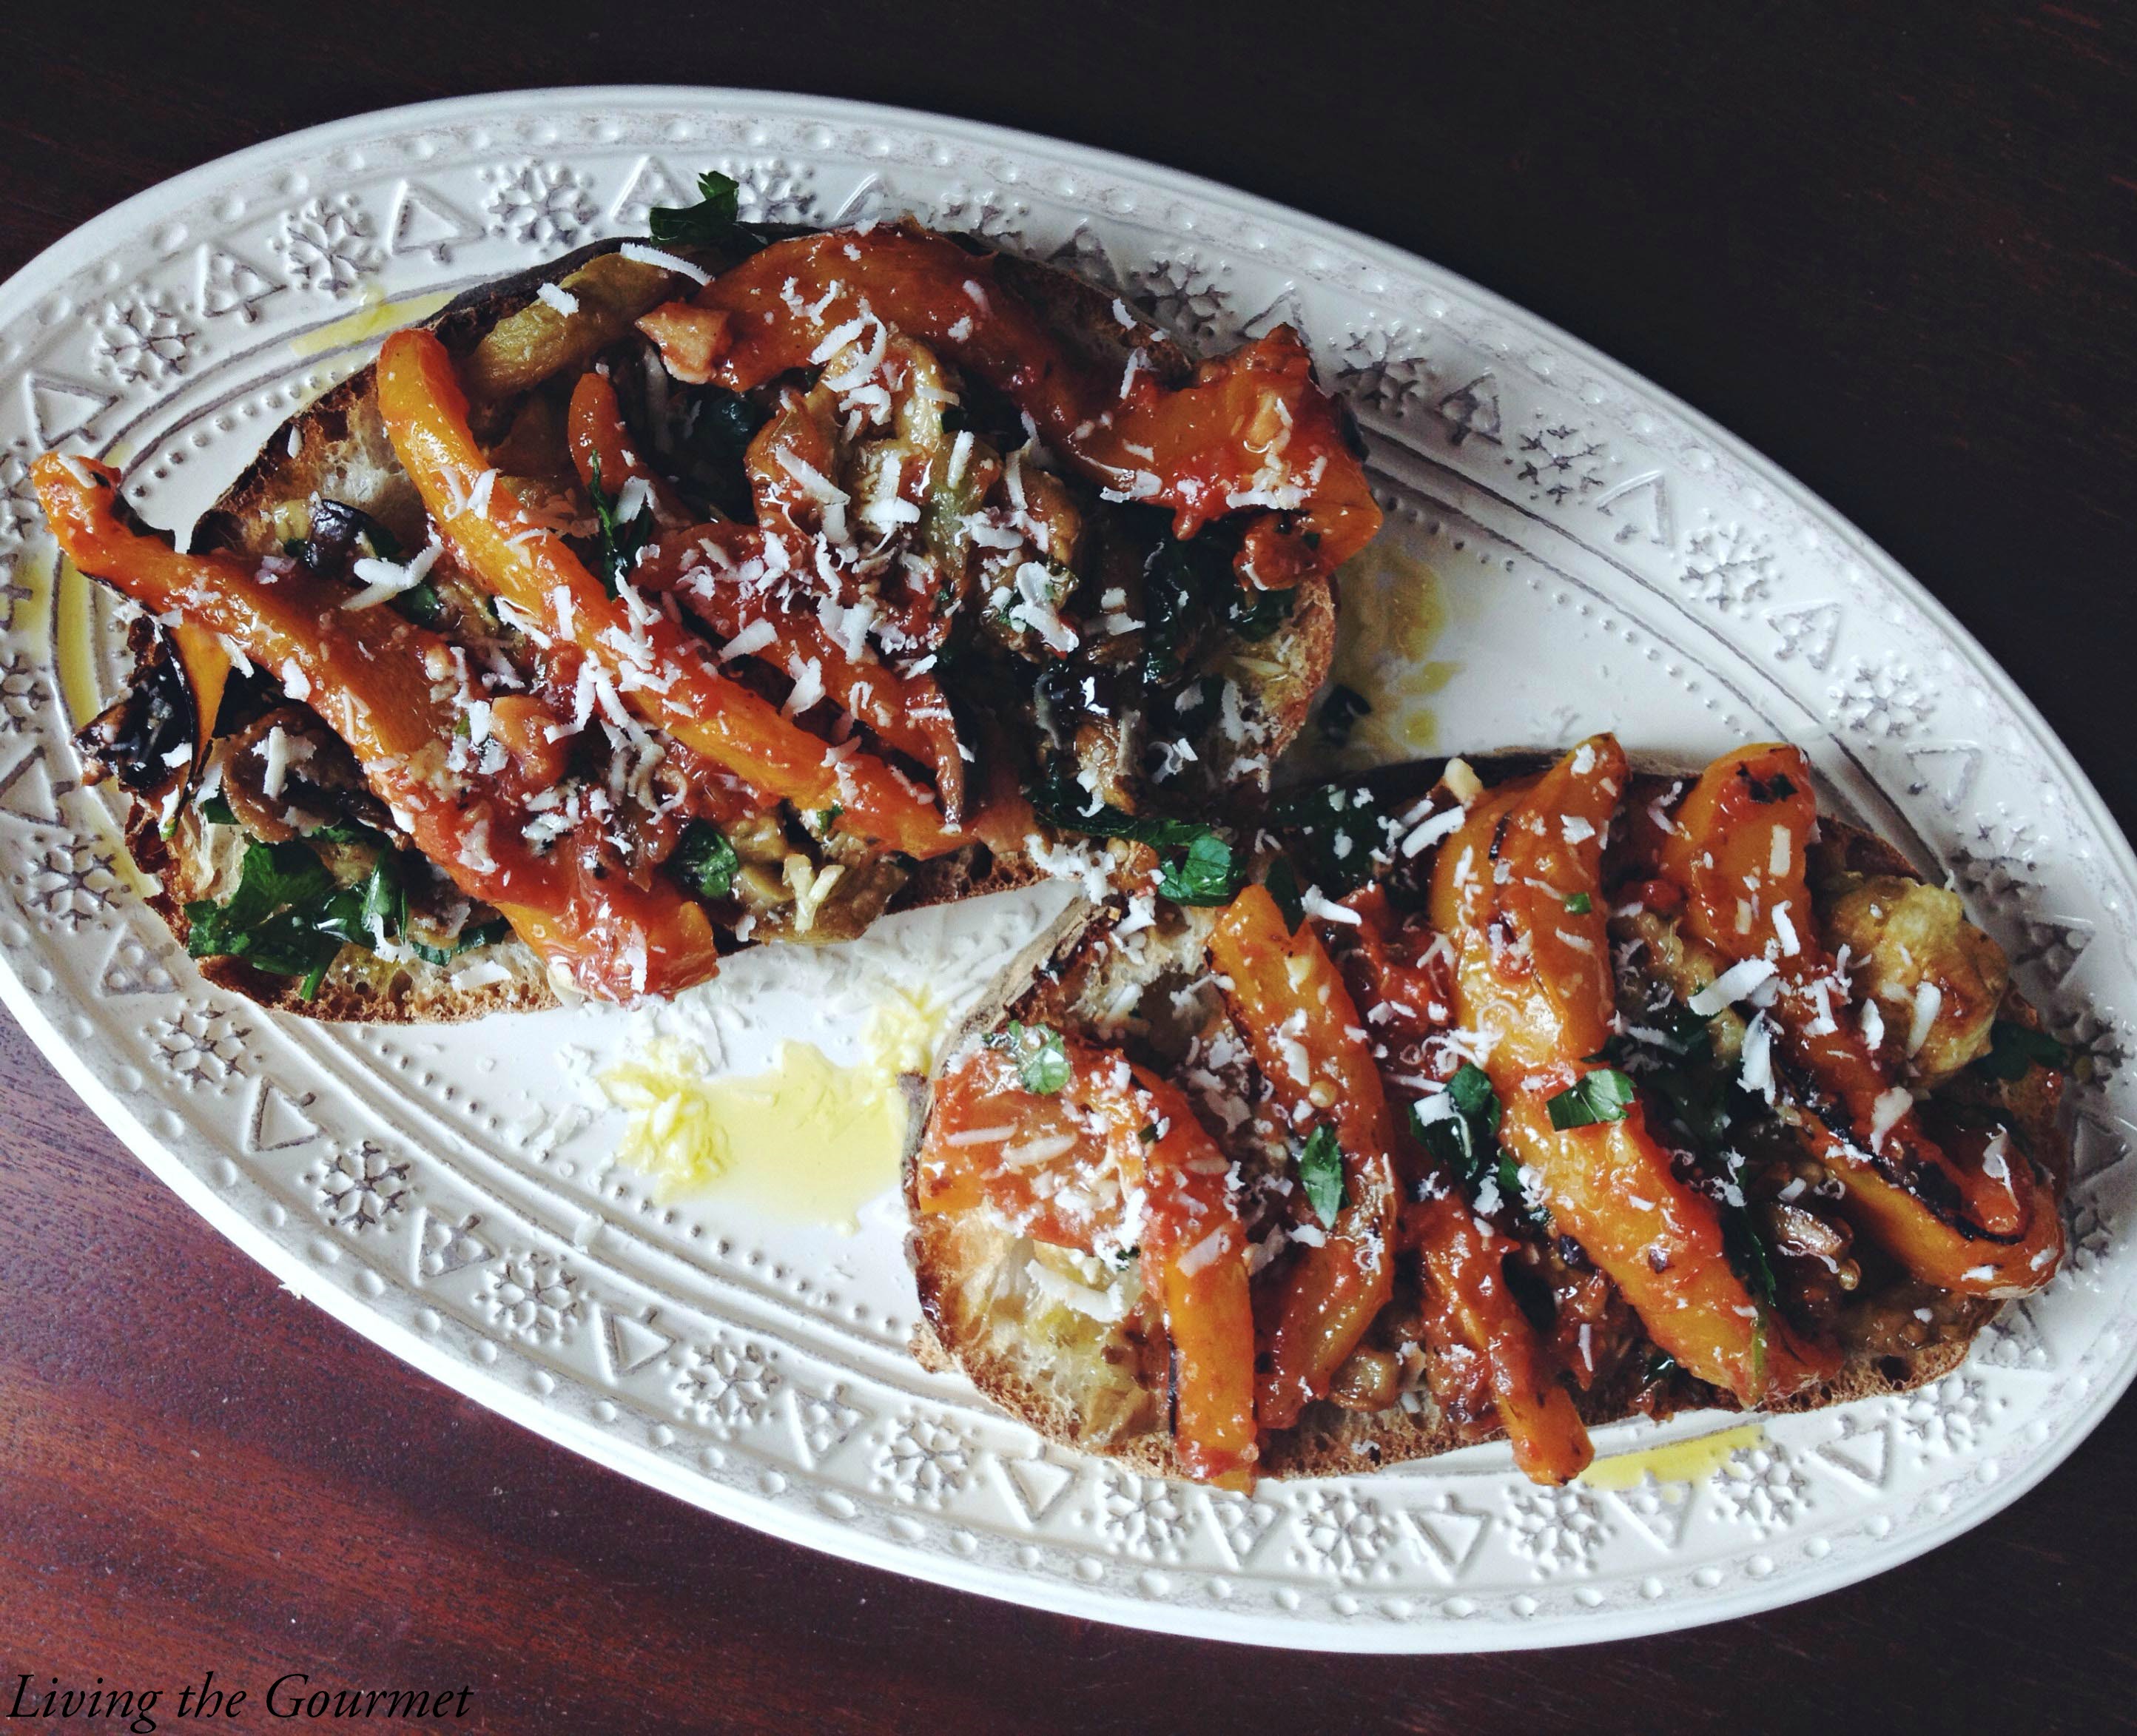 Living the Gourmet: Roasted Peppers & Eggplant Crostini